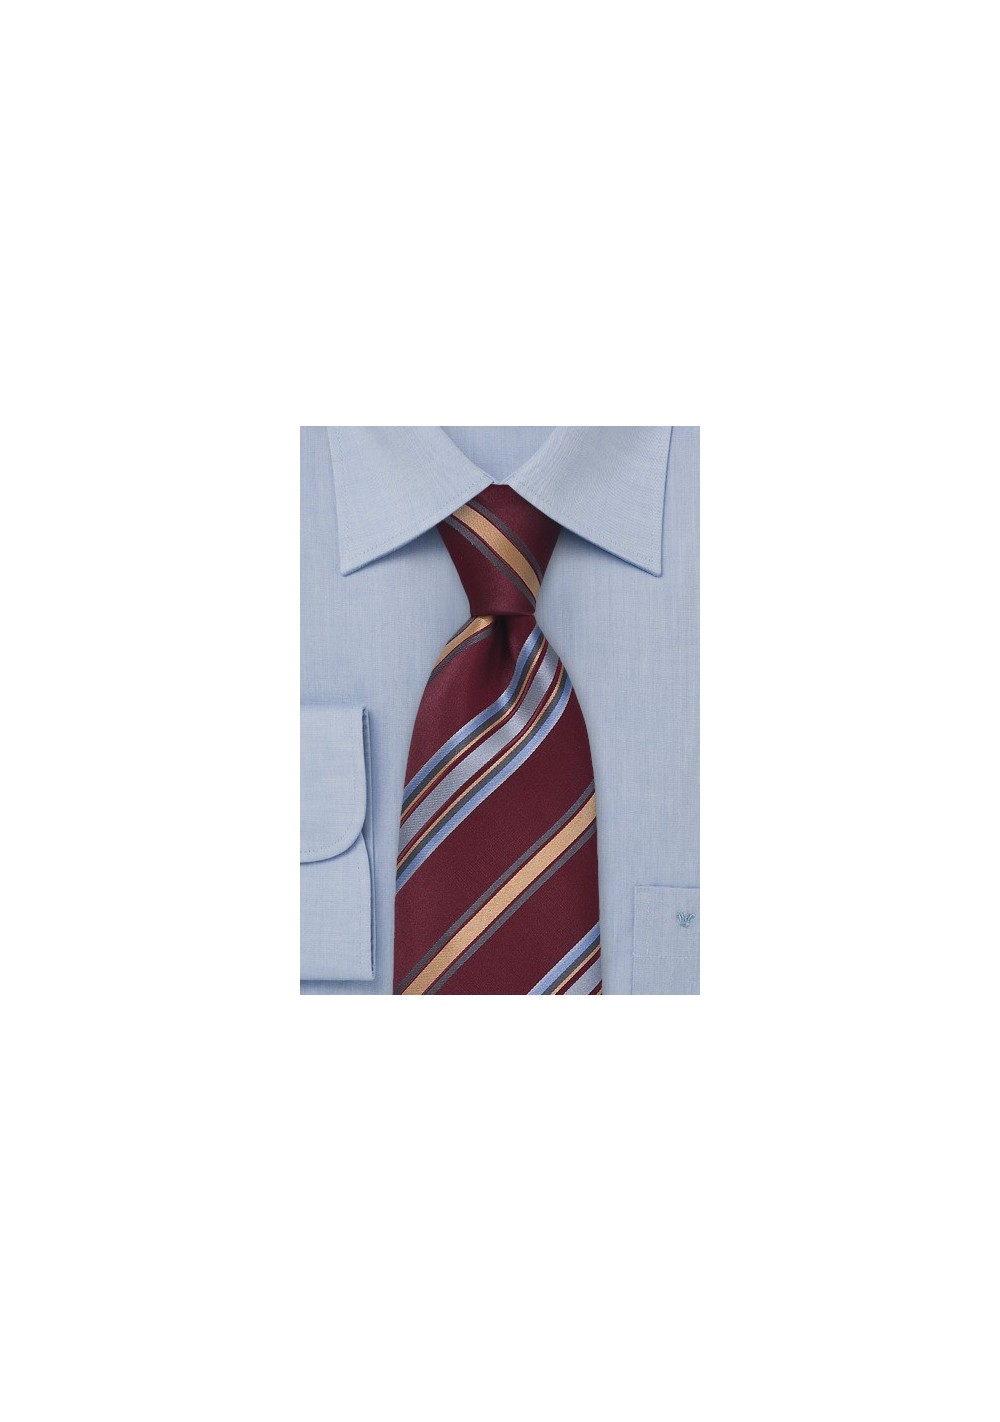 Striped Tie in Burgundy and Blue